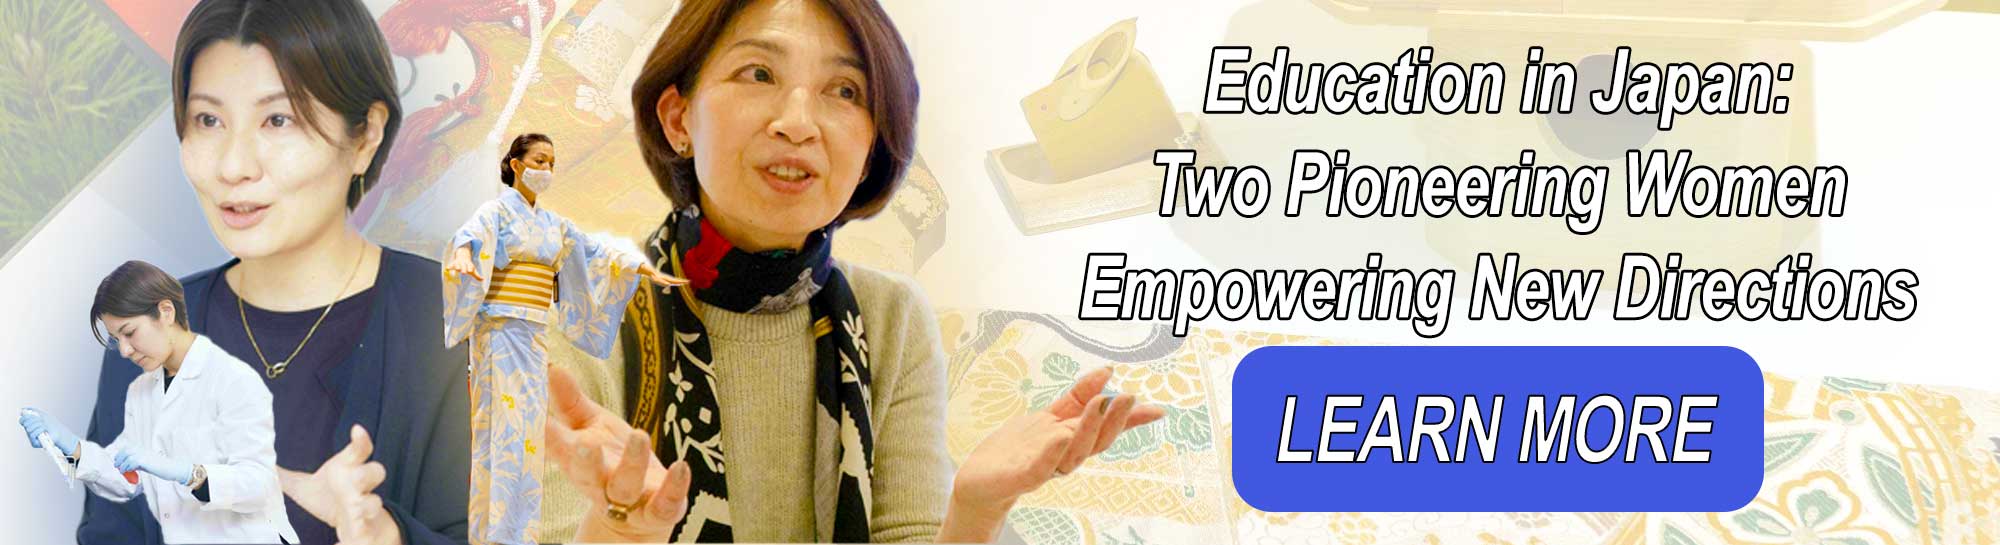 Education in Japan: Two Pioneering Women Empowering New Directions